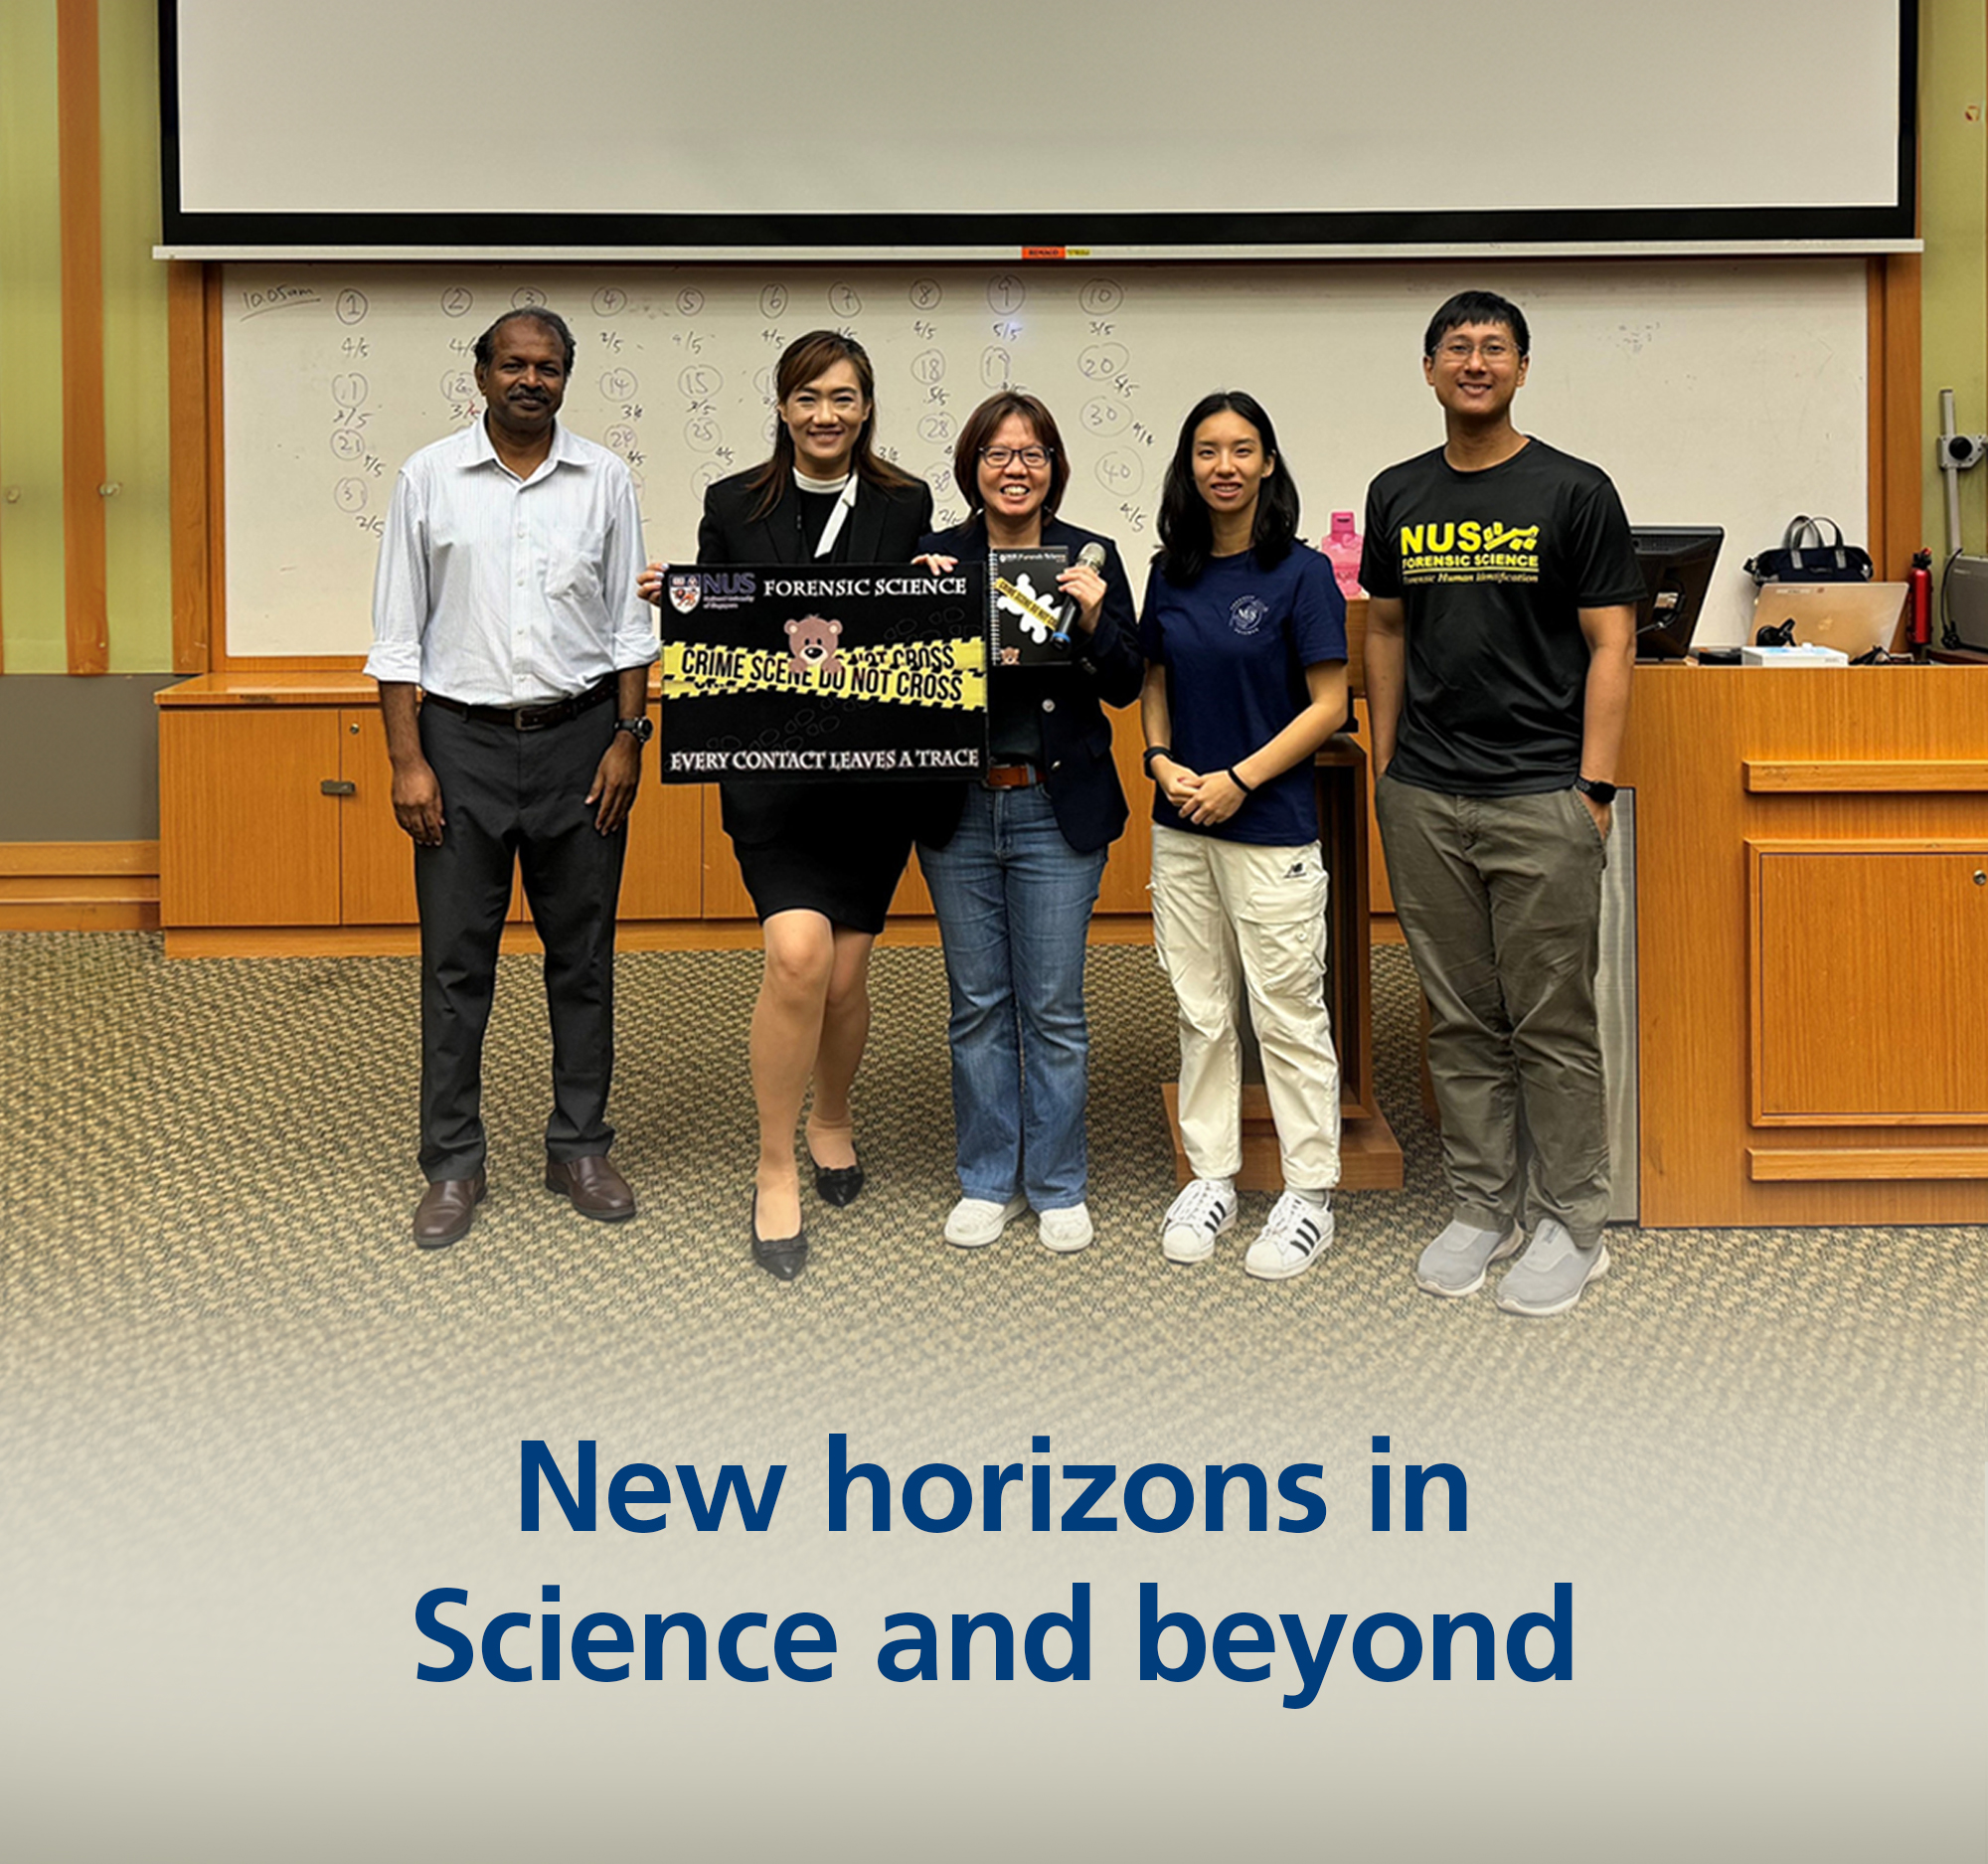 New horizons in Science and beyond